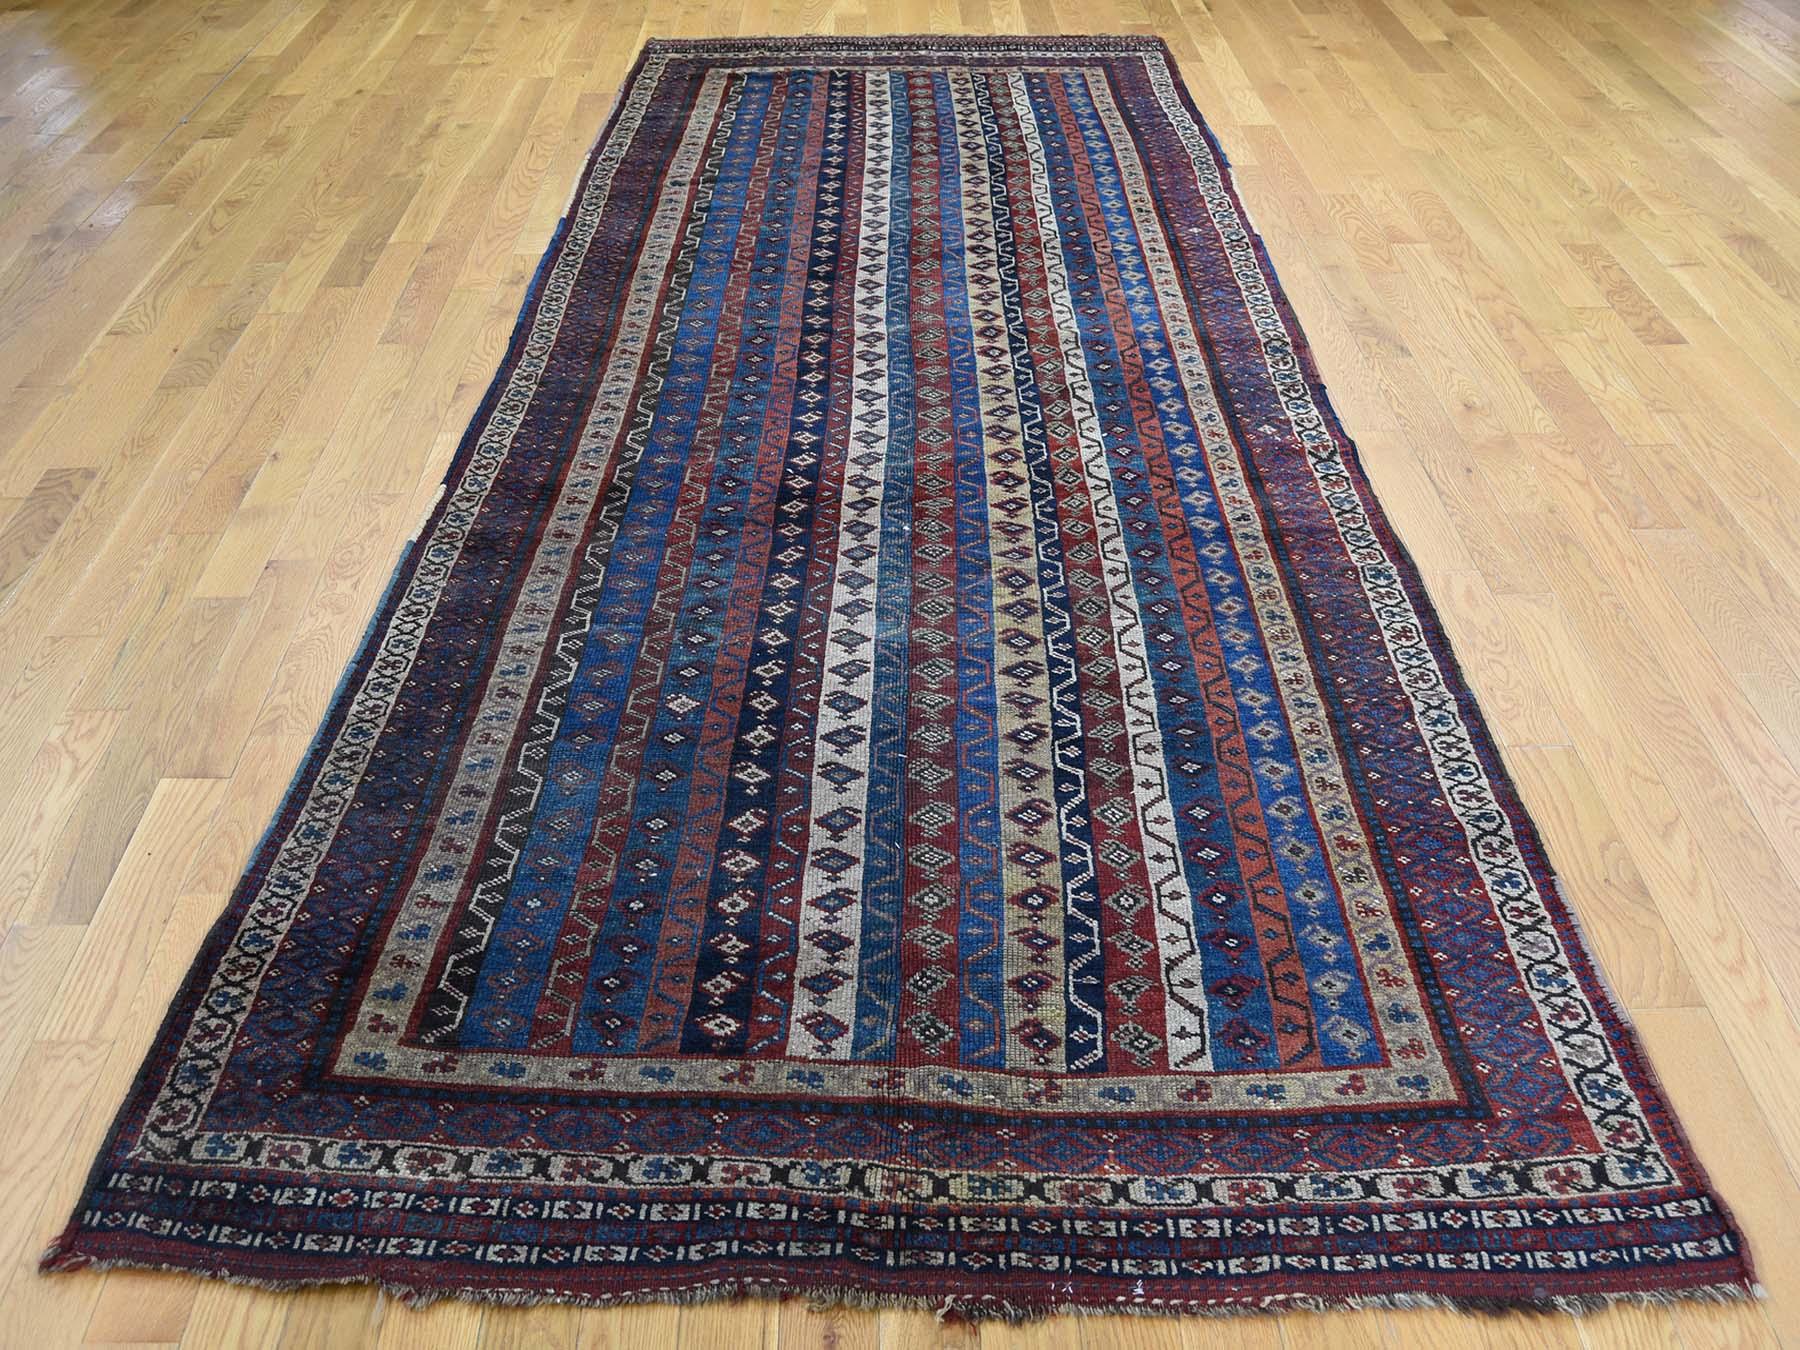 This is a genuine hand knotted oriental rug. It is not Hand Tufted or Machine Made rug. Our entire inventory is made of either hand knotted or handwoven rugs.

Bring life to your home with this lovely hand knotted Blue Antique Lori Buft , is an